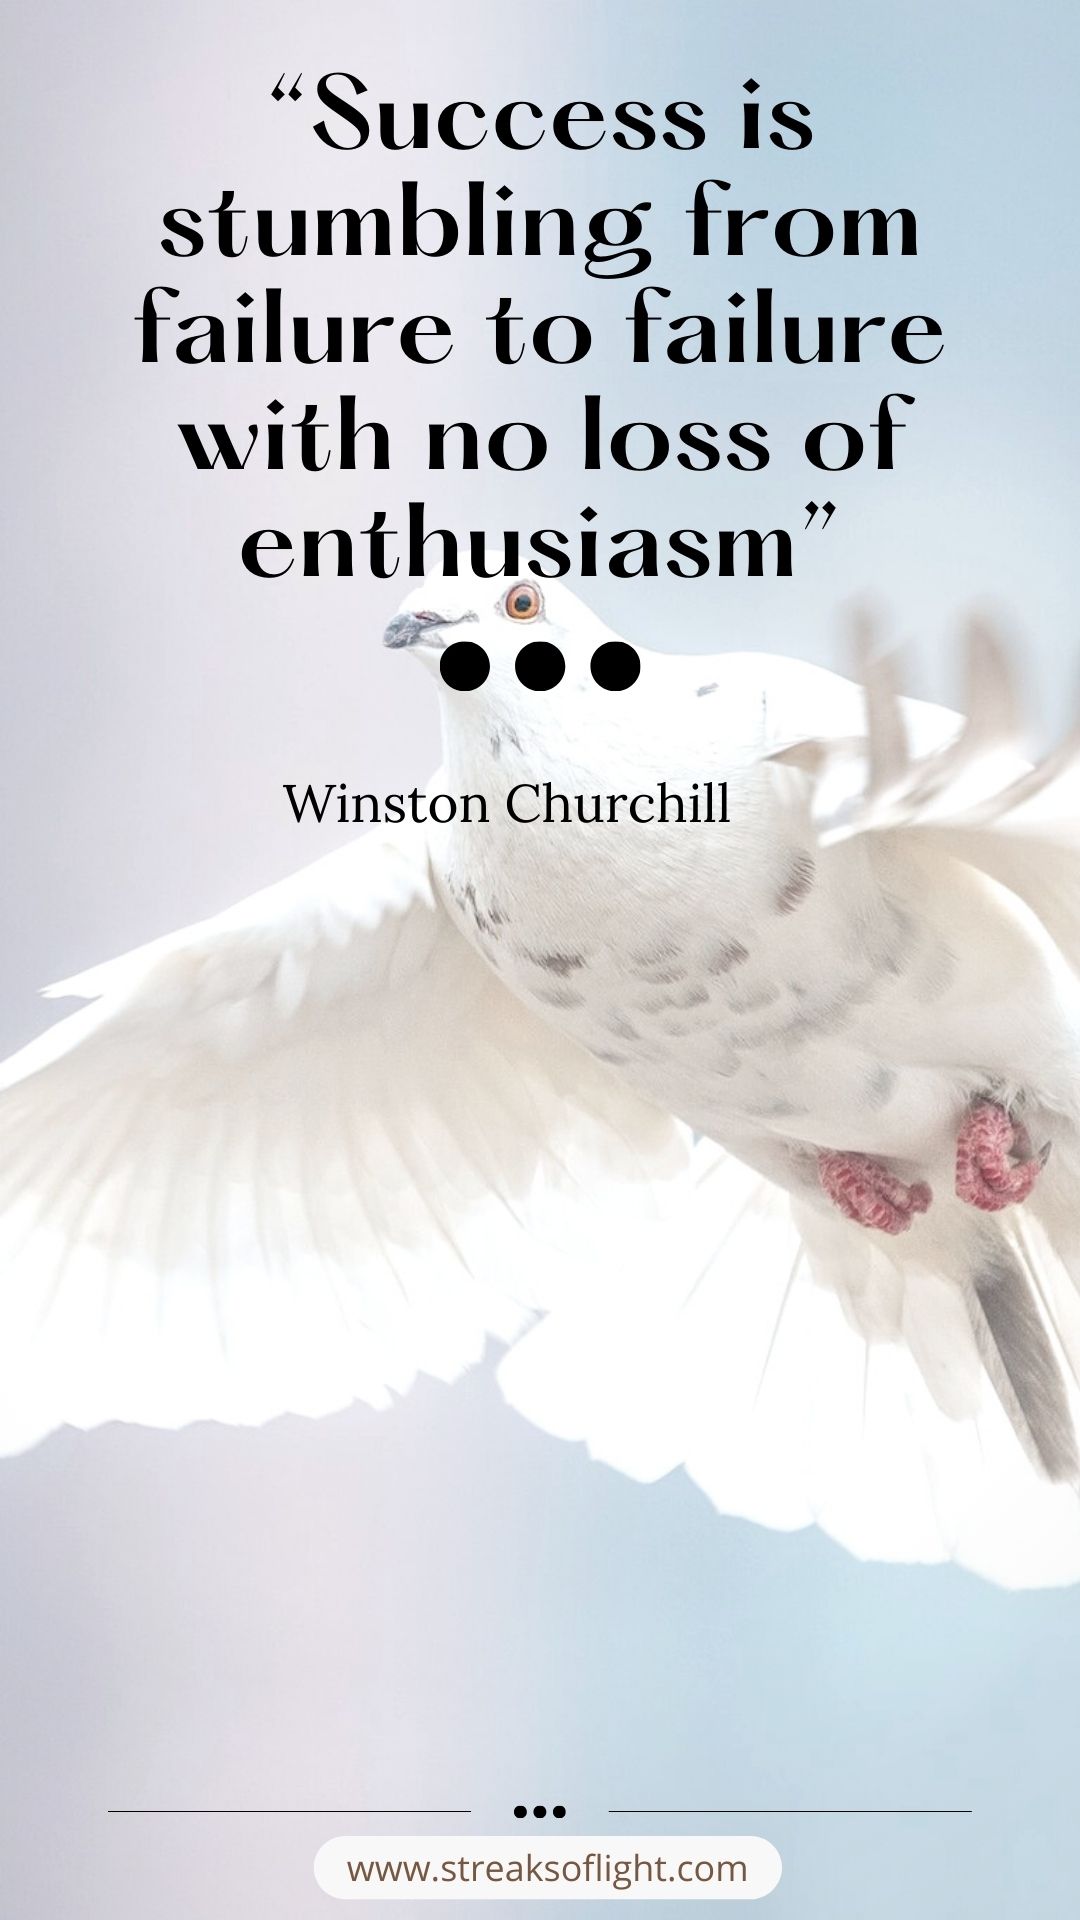 Quote: "Success is stumbling from failure to failure with no loss of enthusiasm." Winston Churchill 

White bird in the background
Post - Small wins